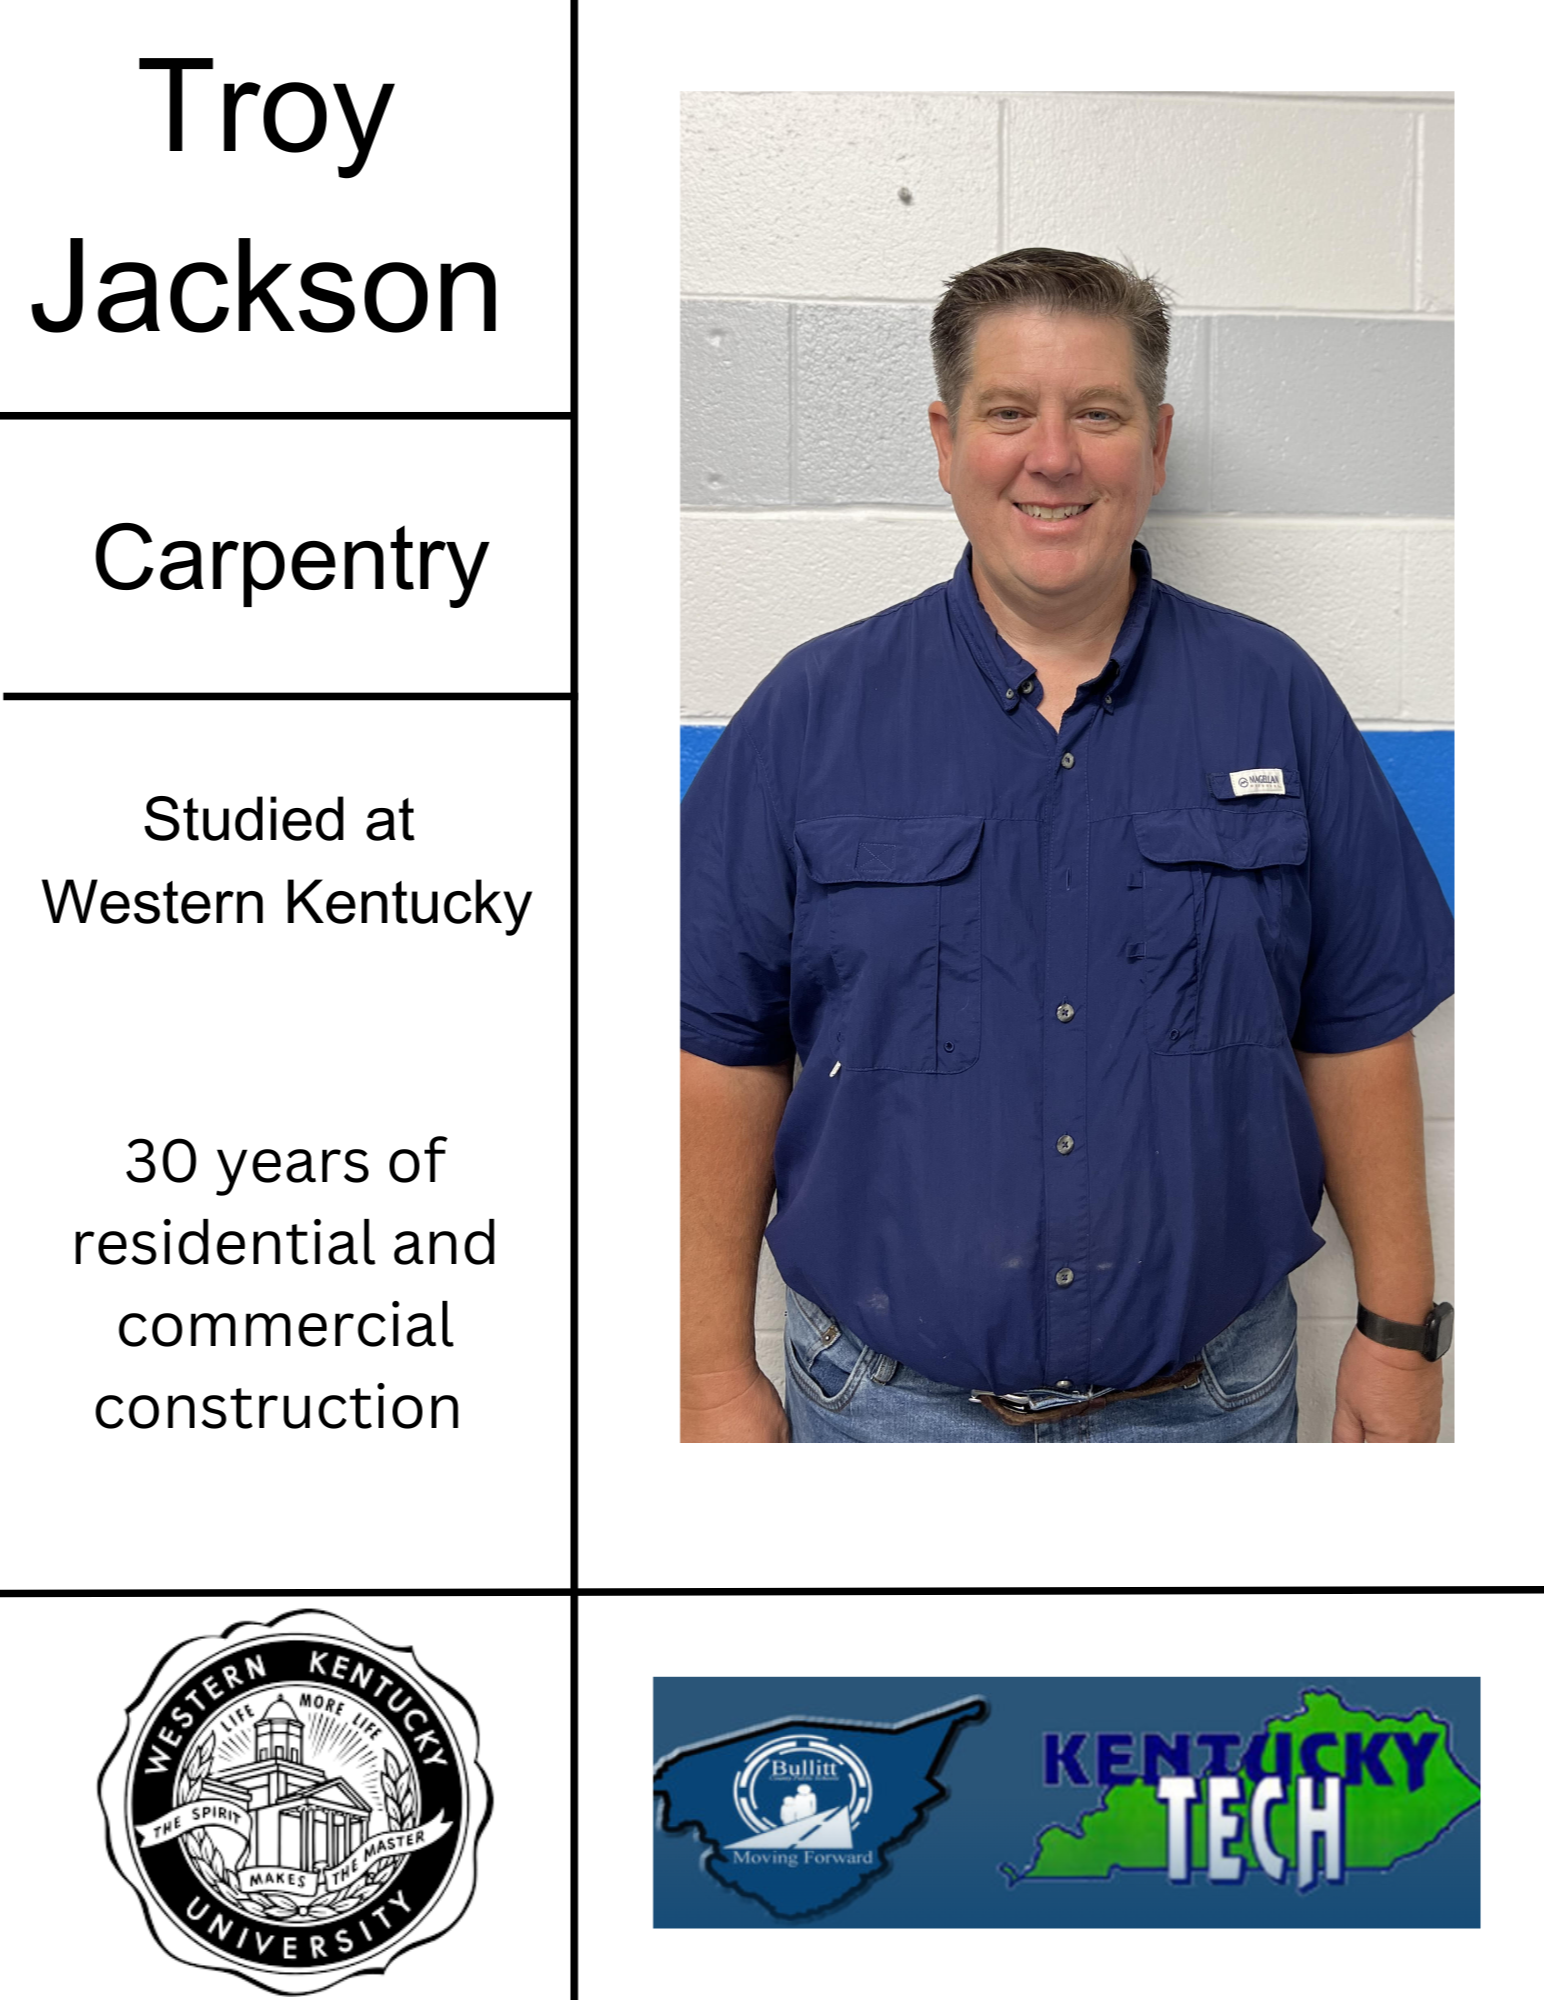 Carpentry  Instructor Troy Jackson studied at Western Kentucky University 30 years experiance